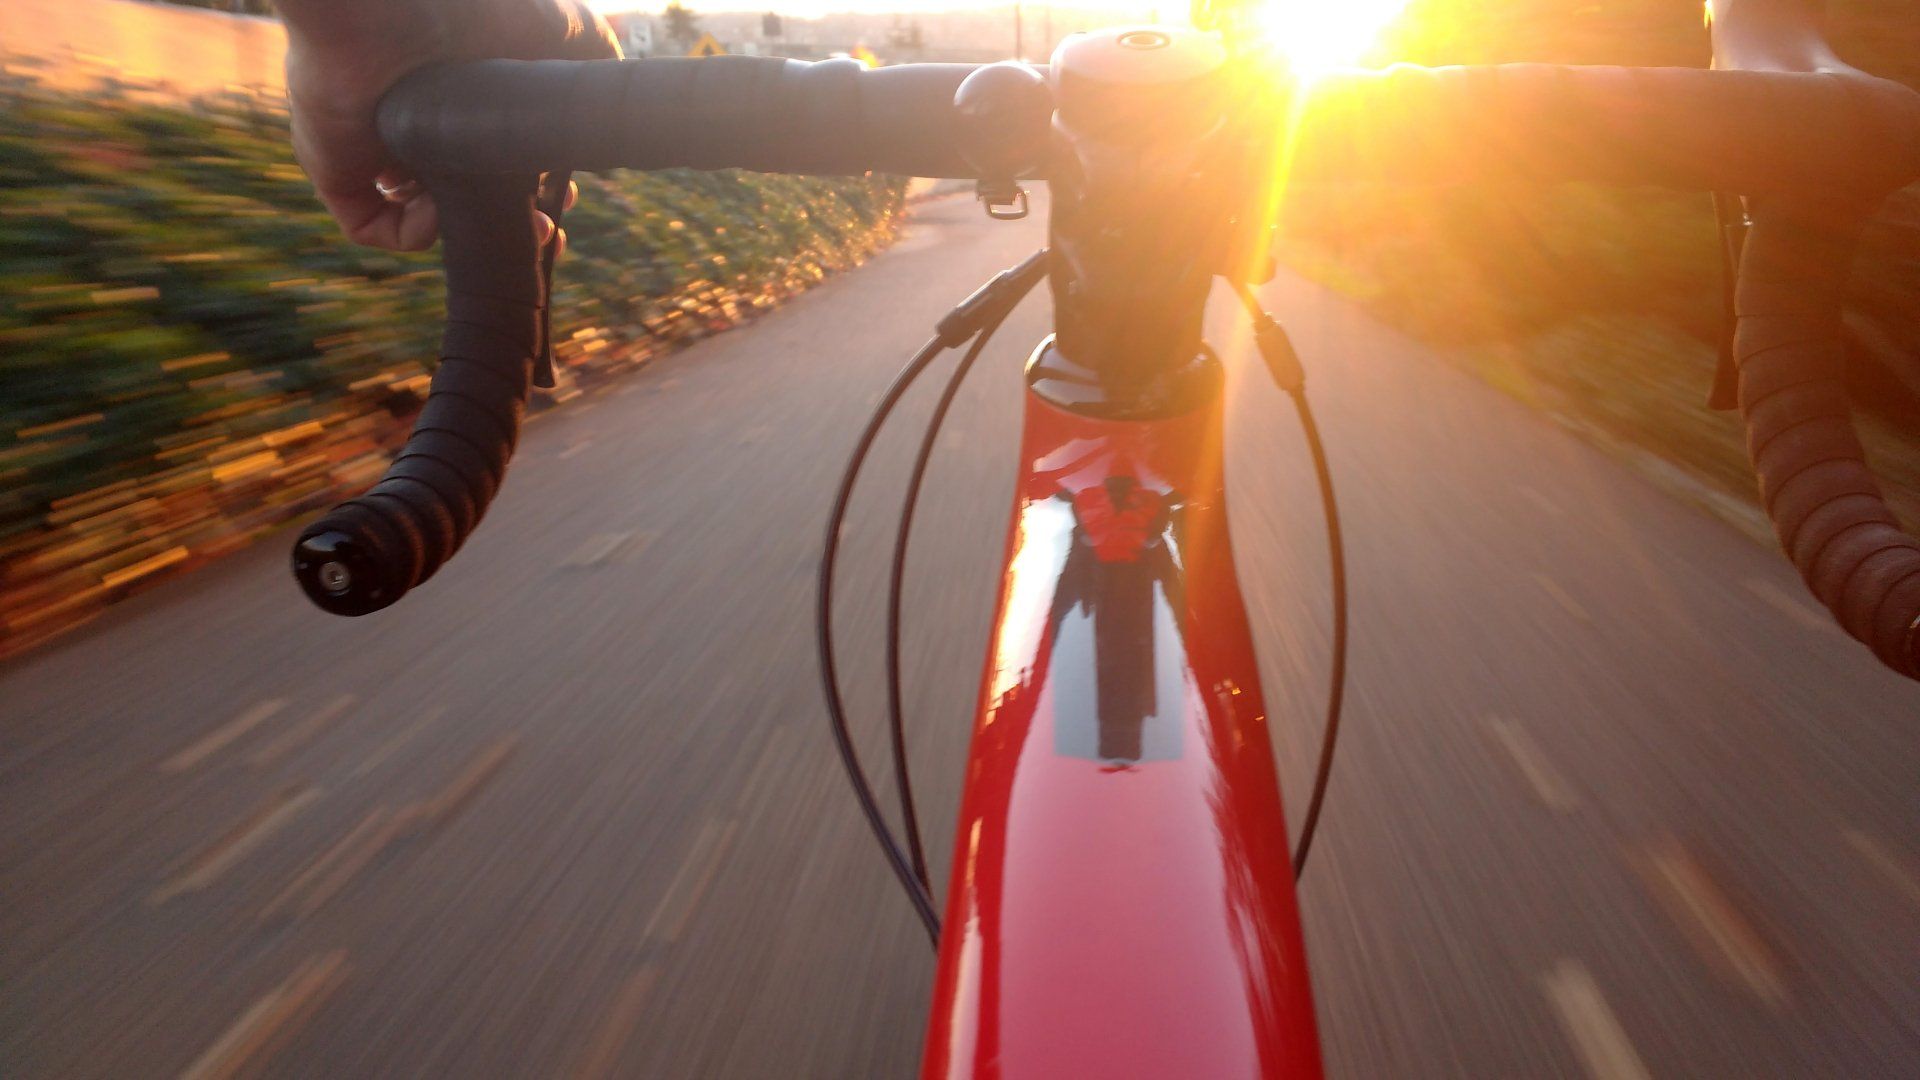 a person is riding a bicycle down a road at sunset .